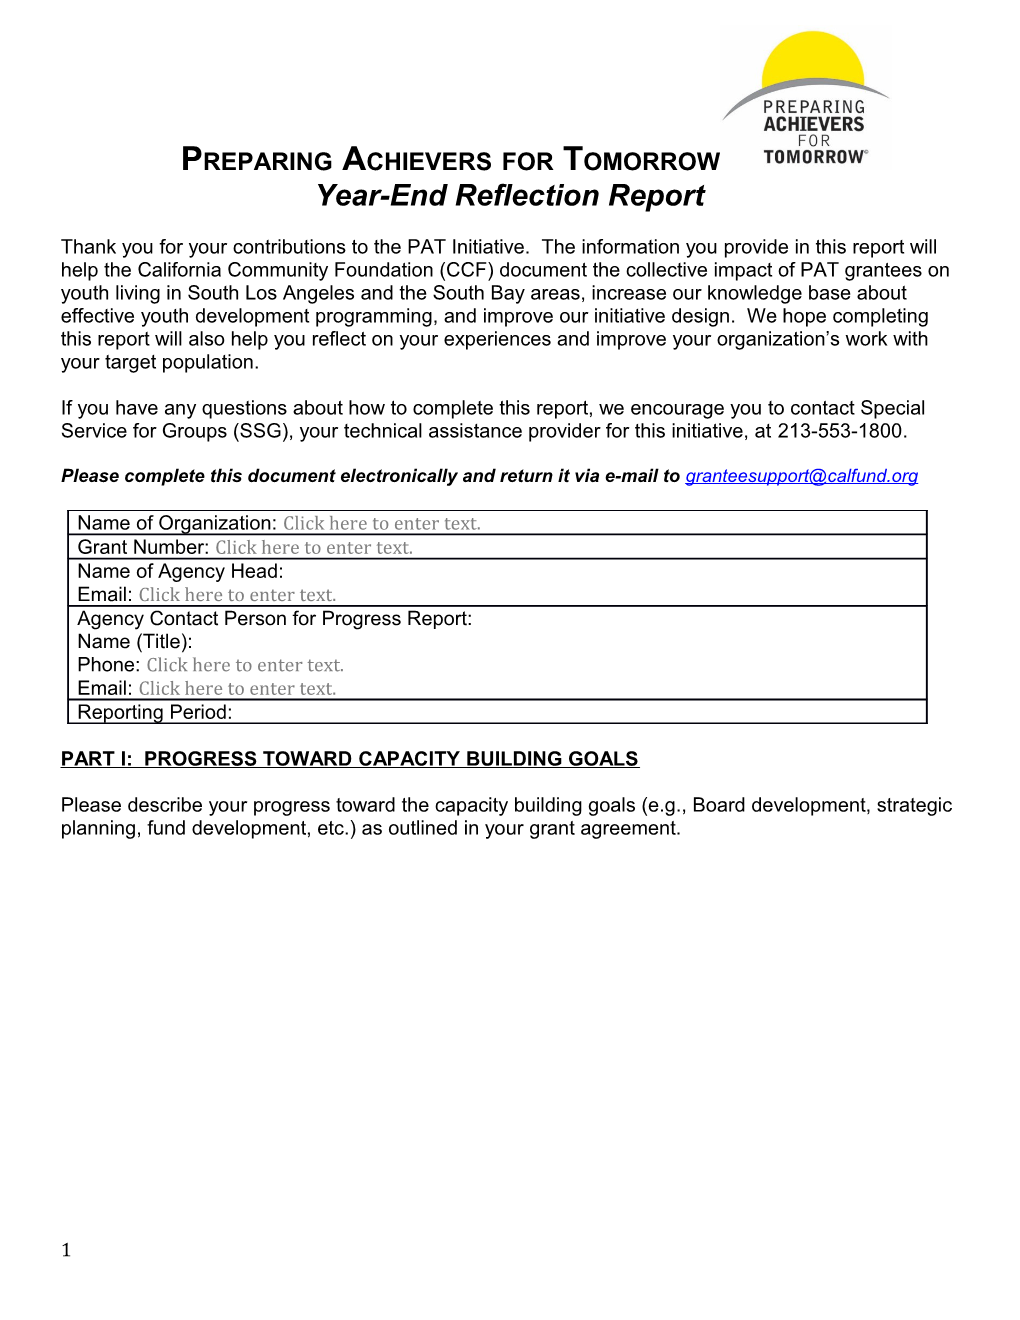 Year-End Reflection Report